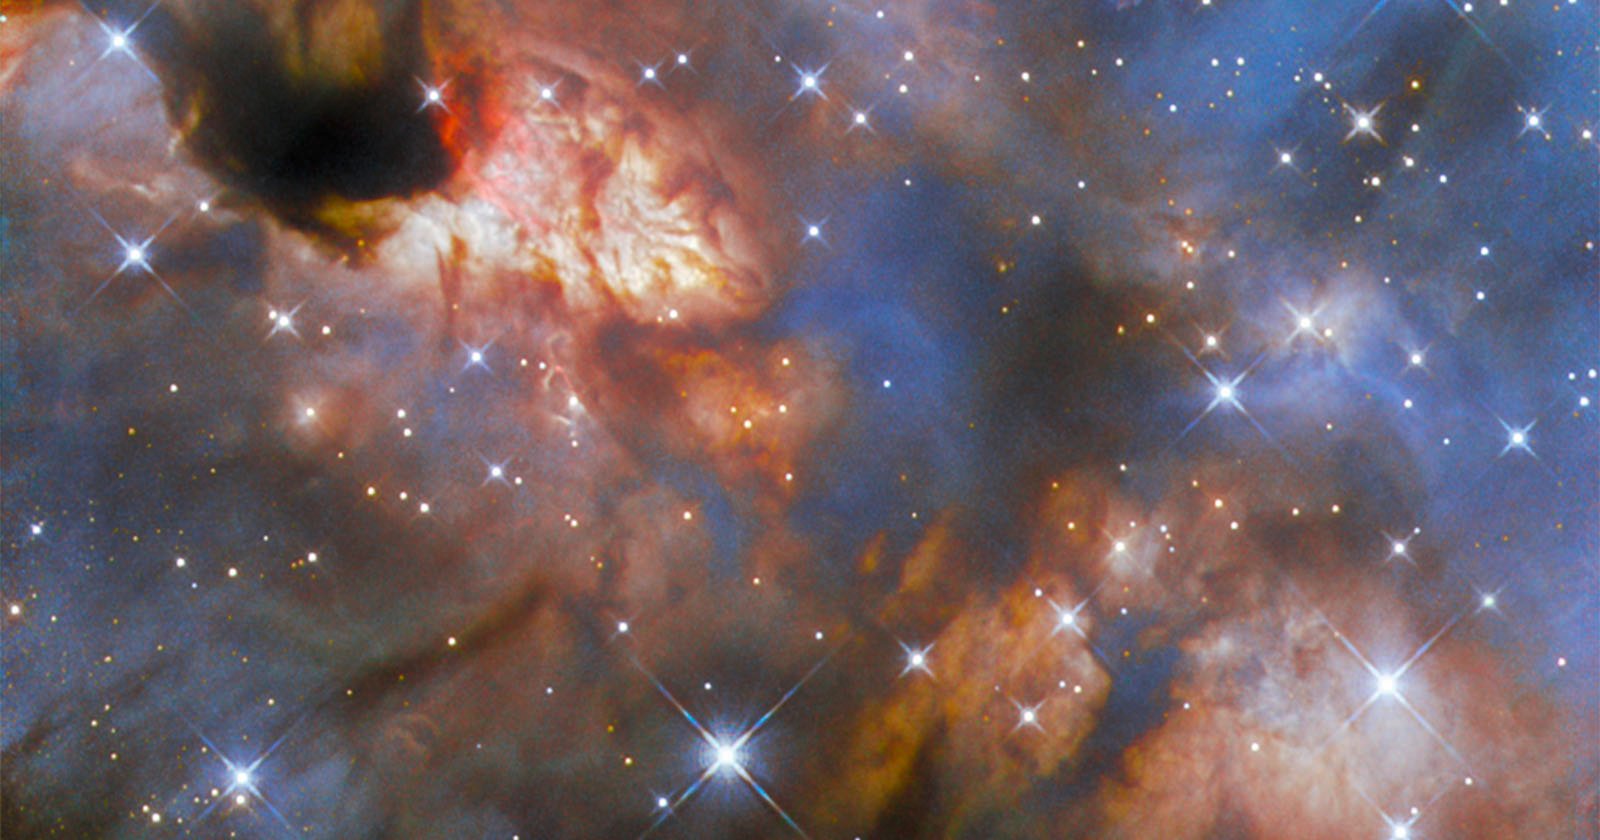 Hubble Captures a Colorful Stellar Nursery in the Milky Way